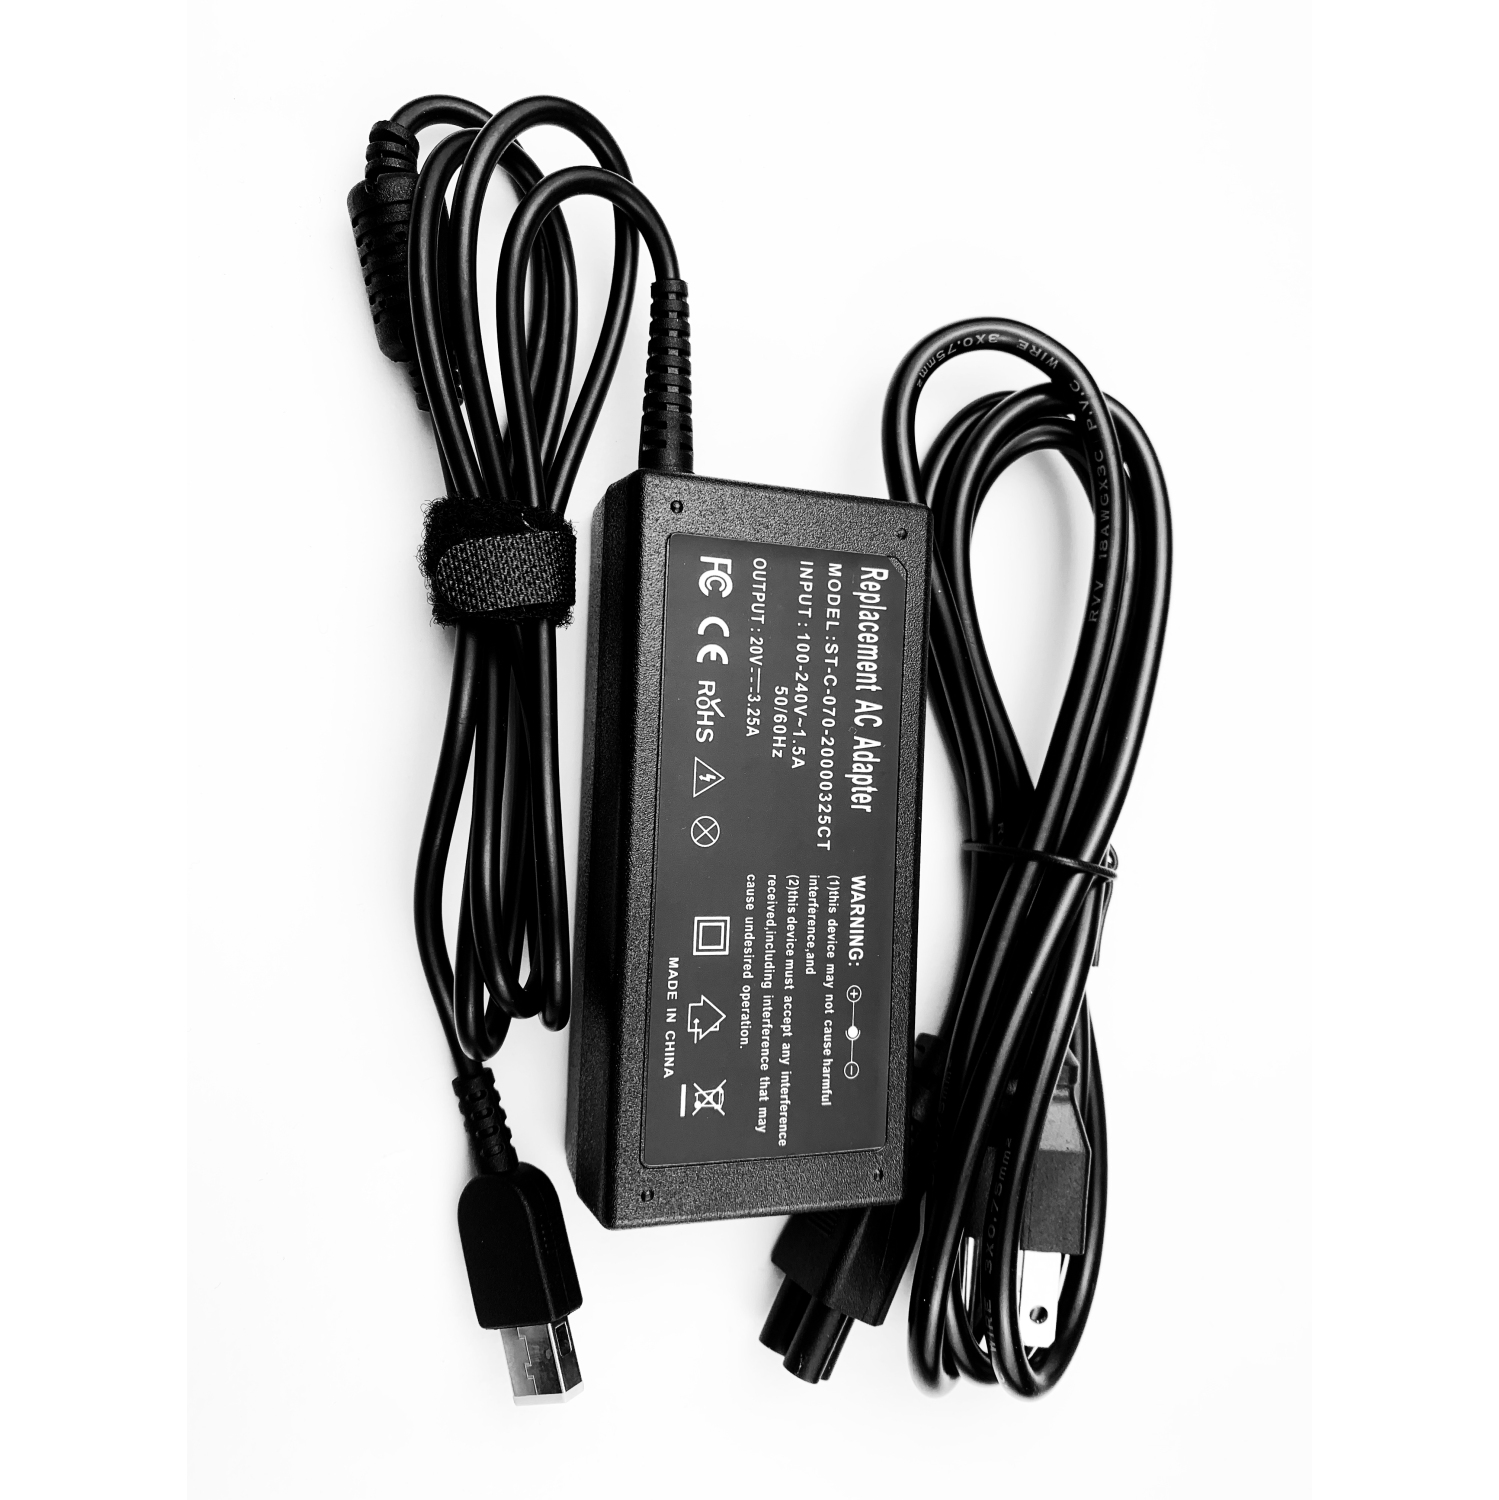 20V 3.25A yellow square tip 65W AC adapter power cord charger for Lenovo P/N 01FR053 Yoga Tablet 10